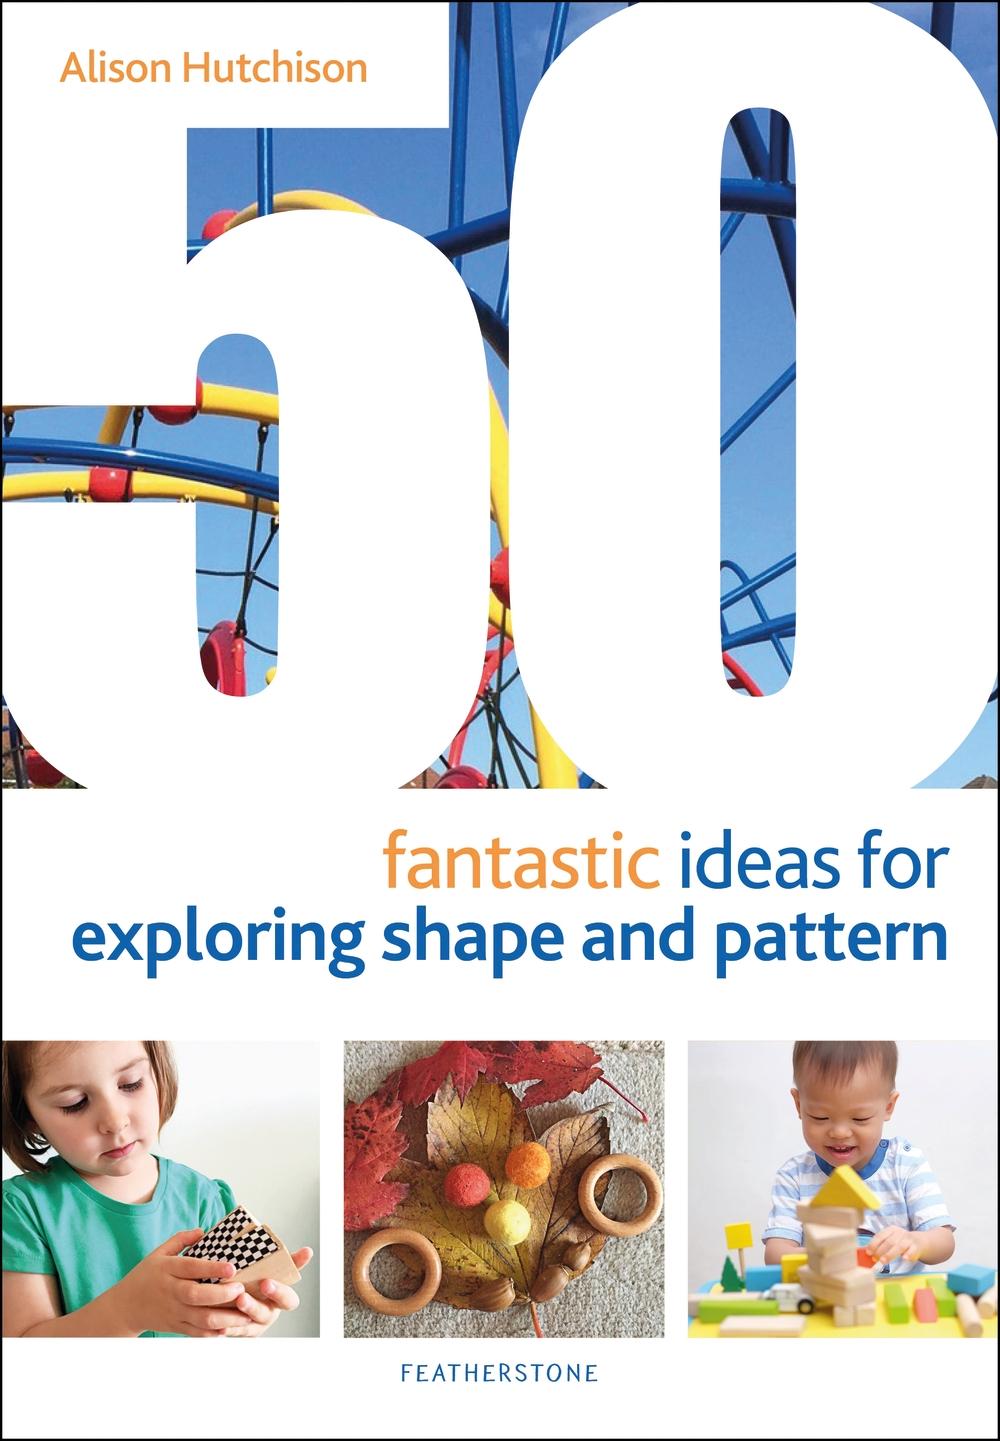 50 Fantastic Ideas for Exploring Shape and Pattern - Alison Hutchison